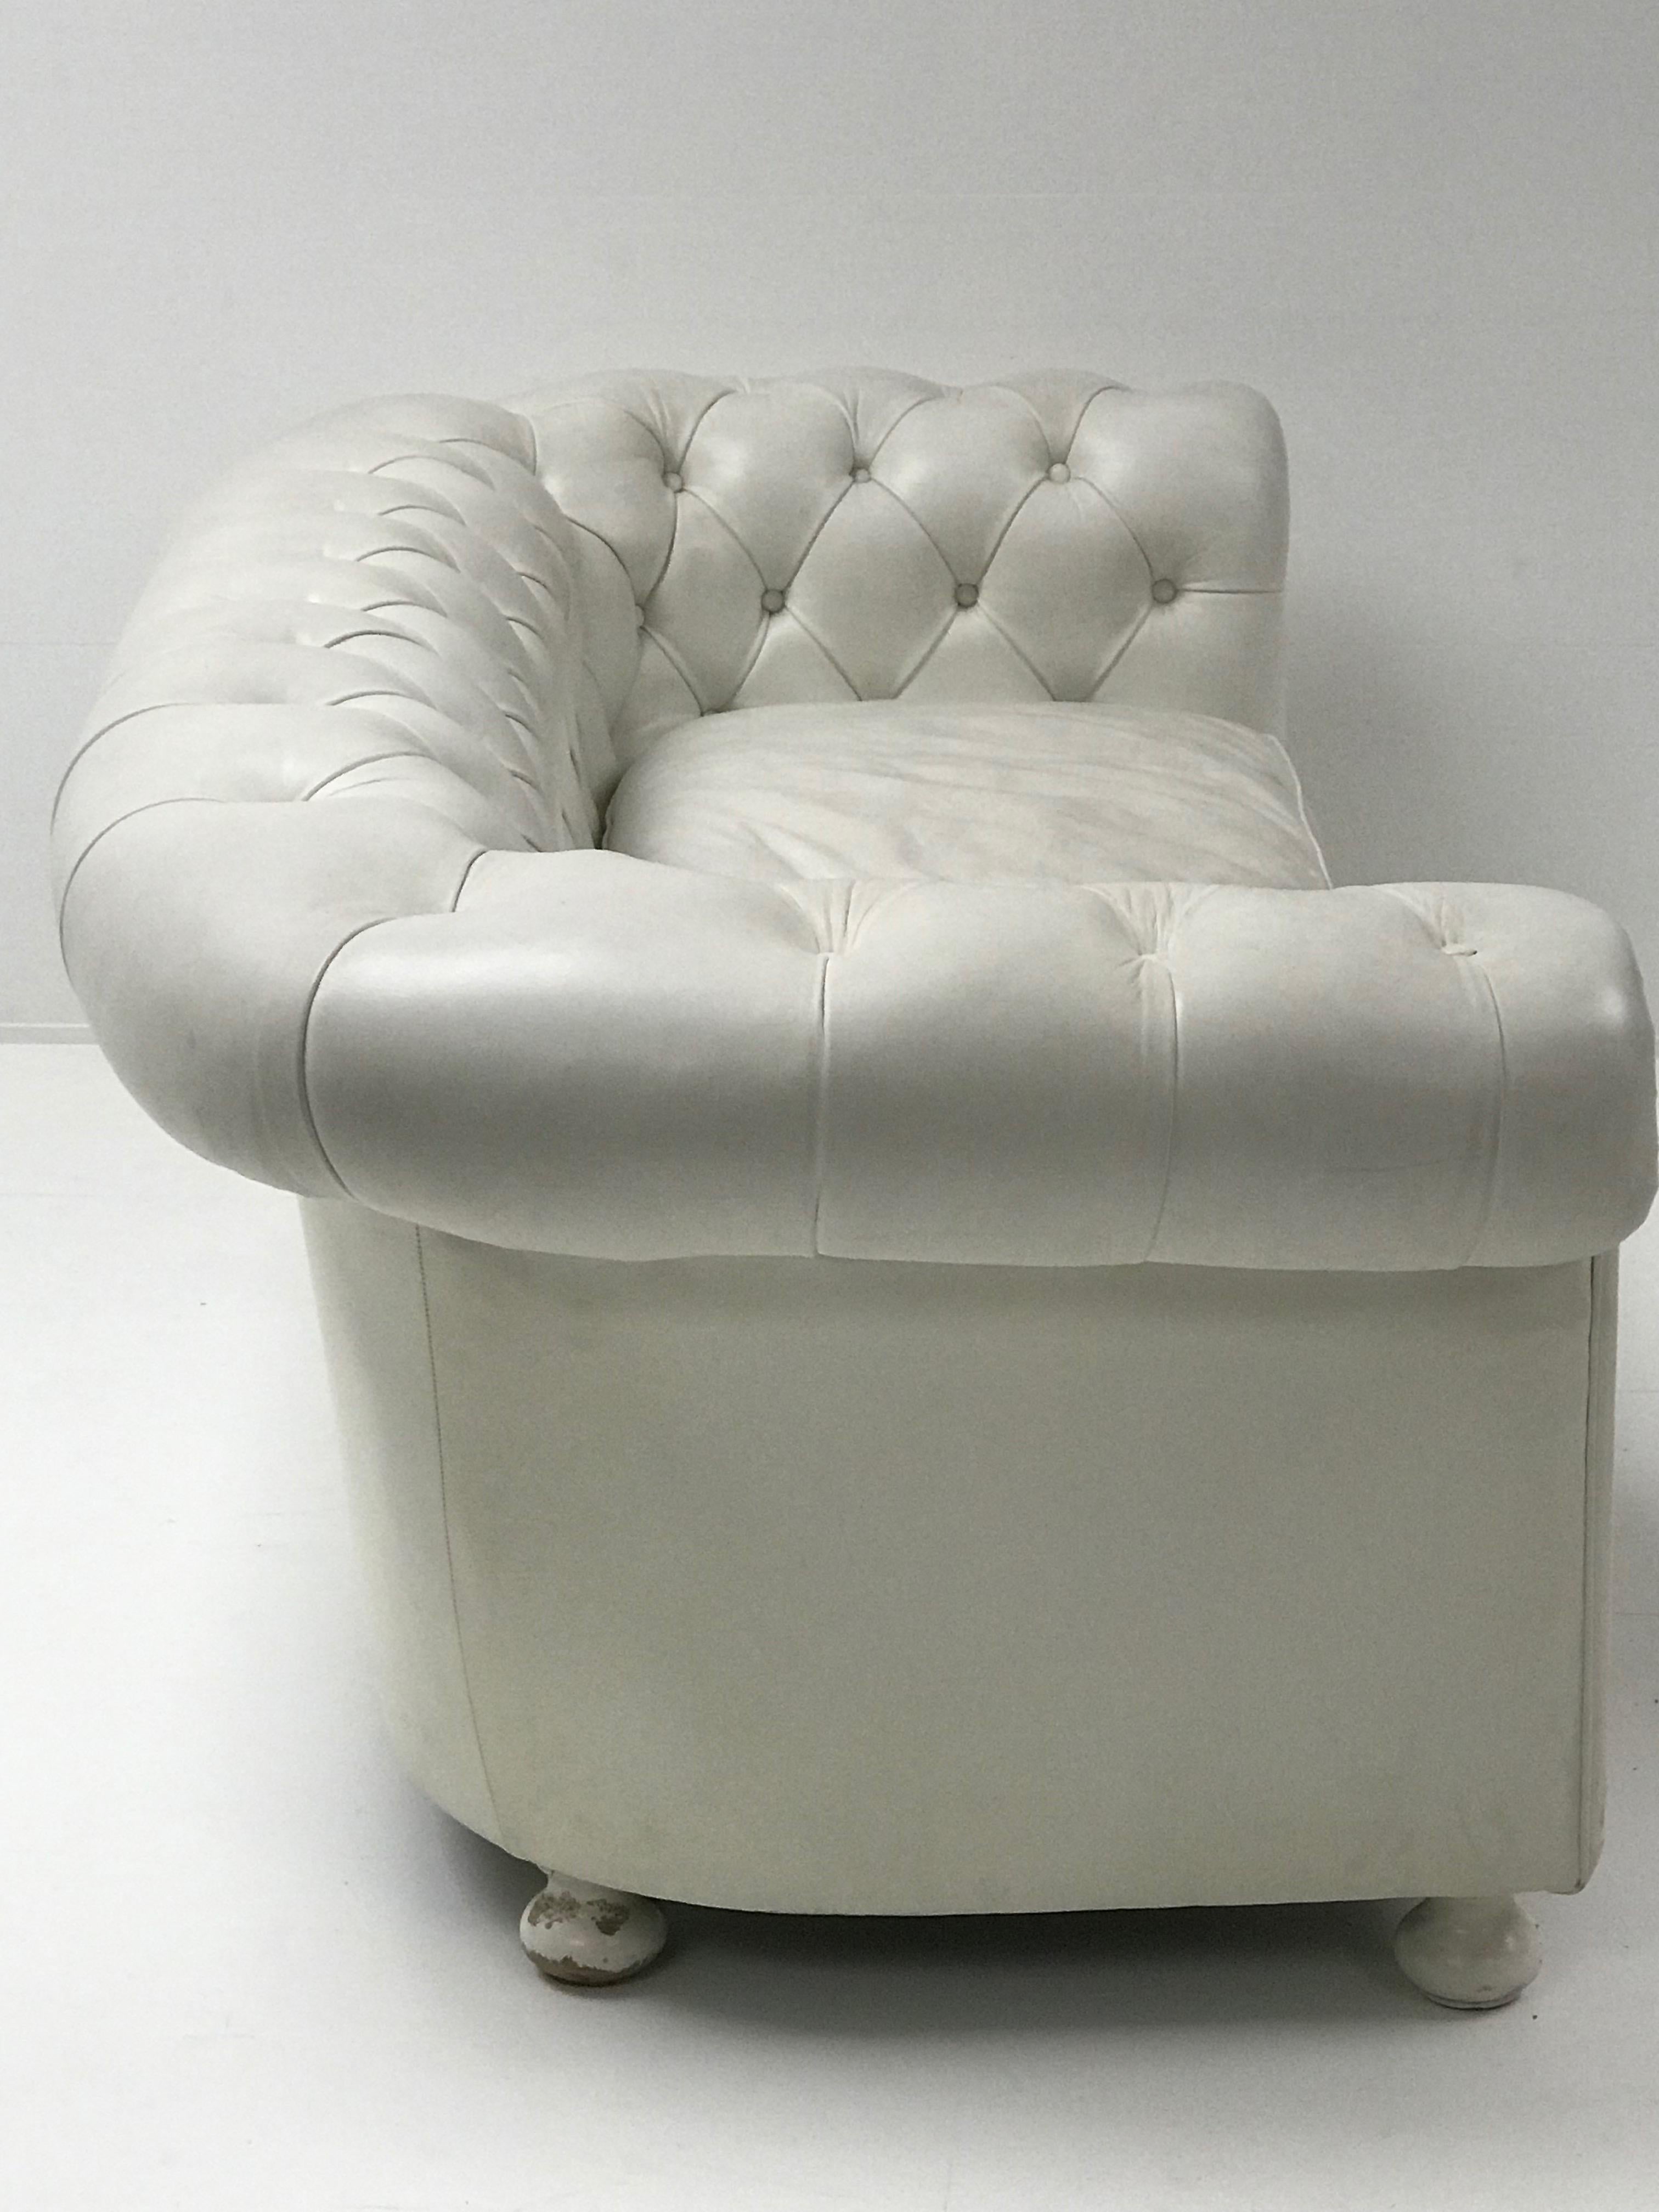 Polished White Chesterfield, Very Nice Patina For Sale